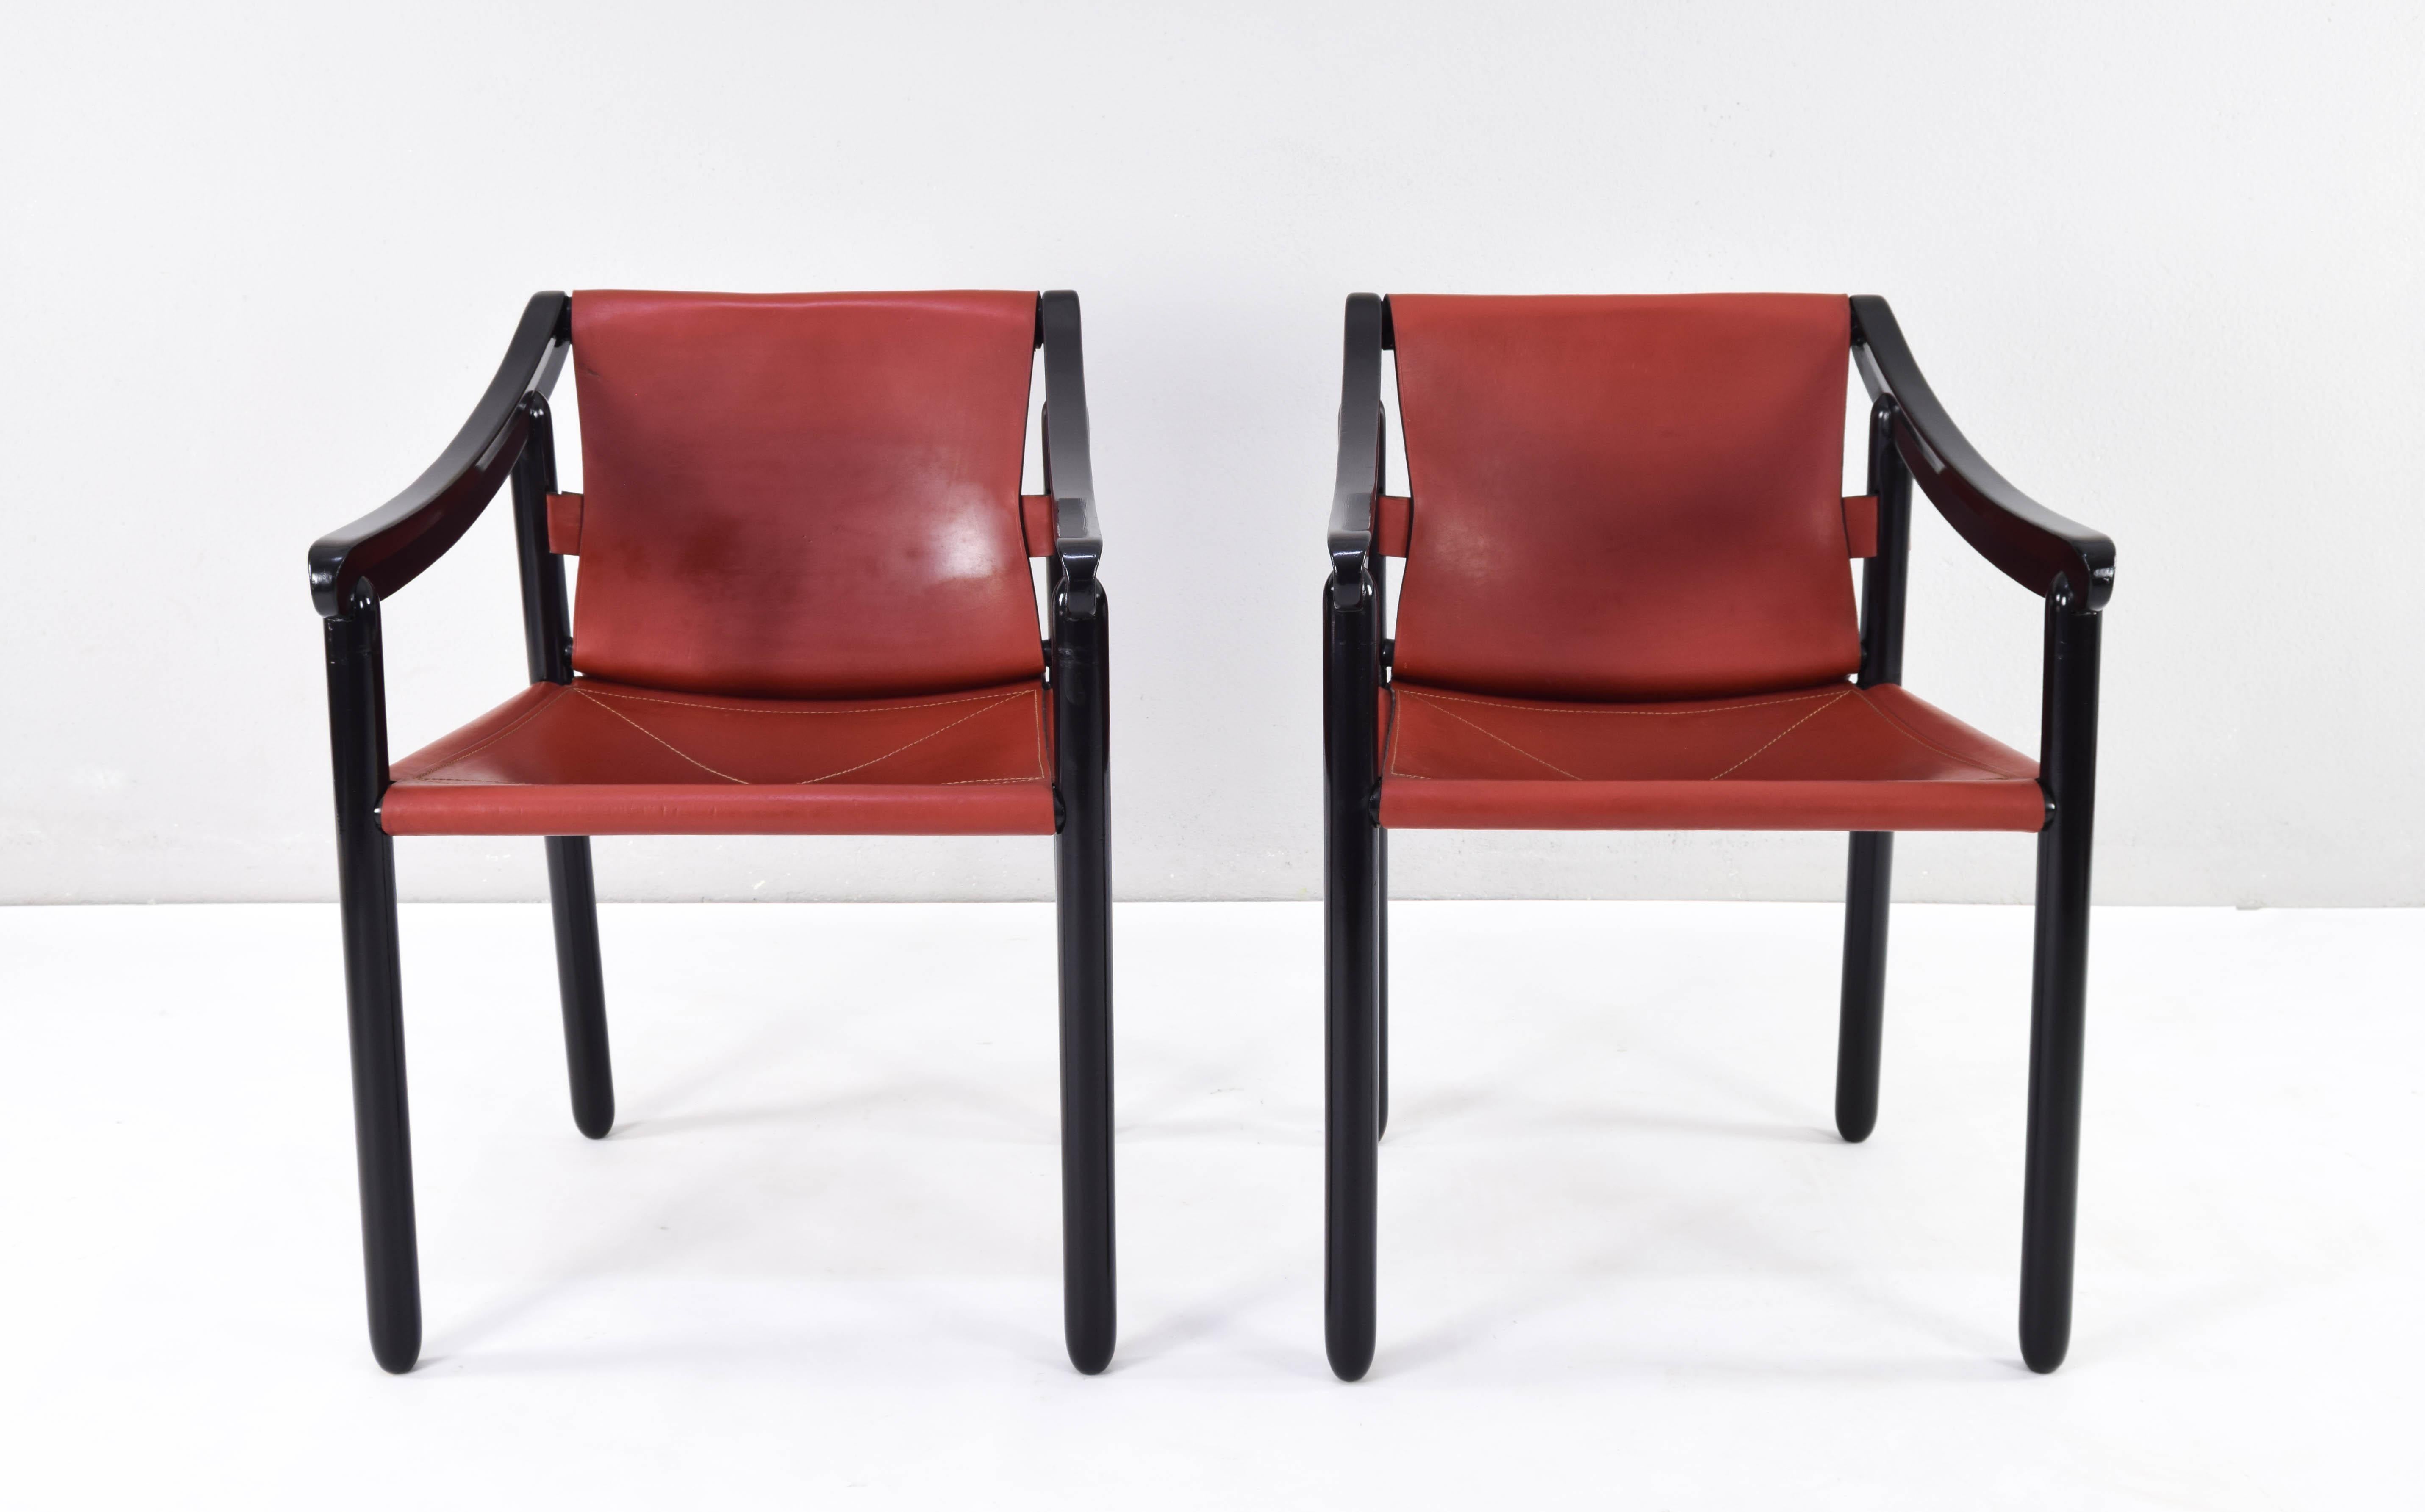 Pair of model 905 chairs designed by Vico Magistretti in the 1960s and produced by the firm Cassina.
Singular thanks to its subtle design, this model has cylindrical legs and curved arms in black lacquered beech wood. Seat and backrest are made